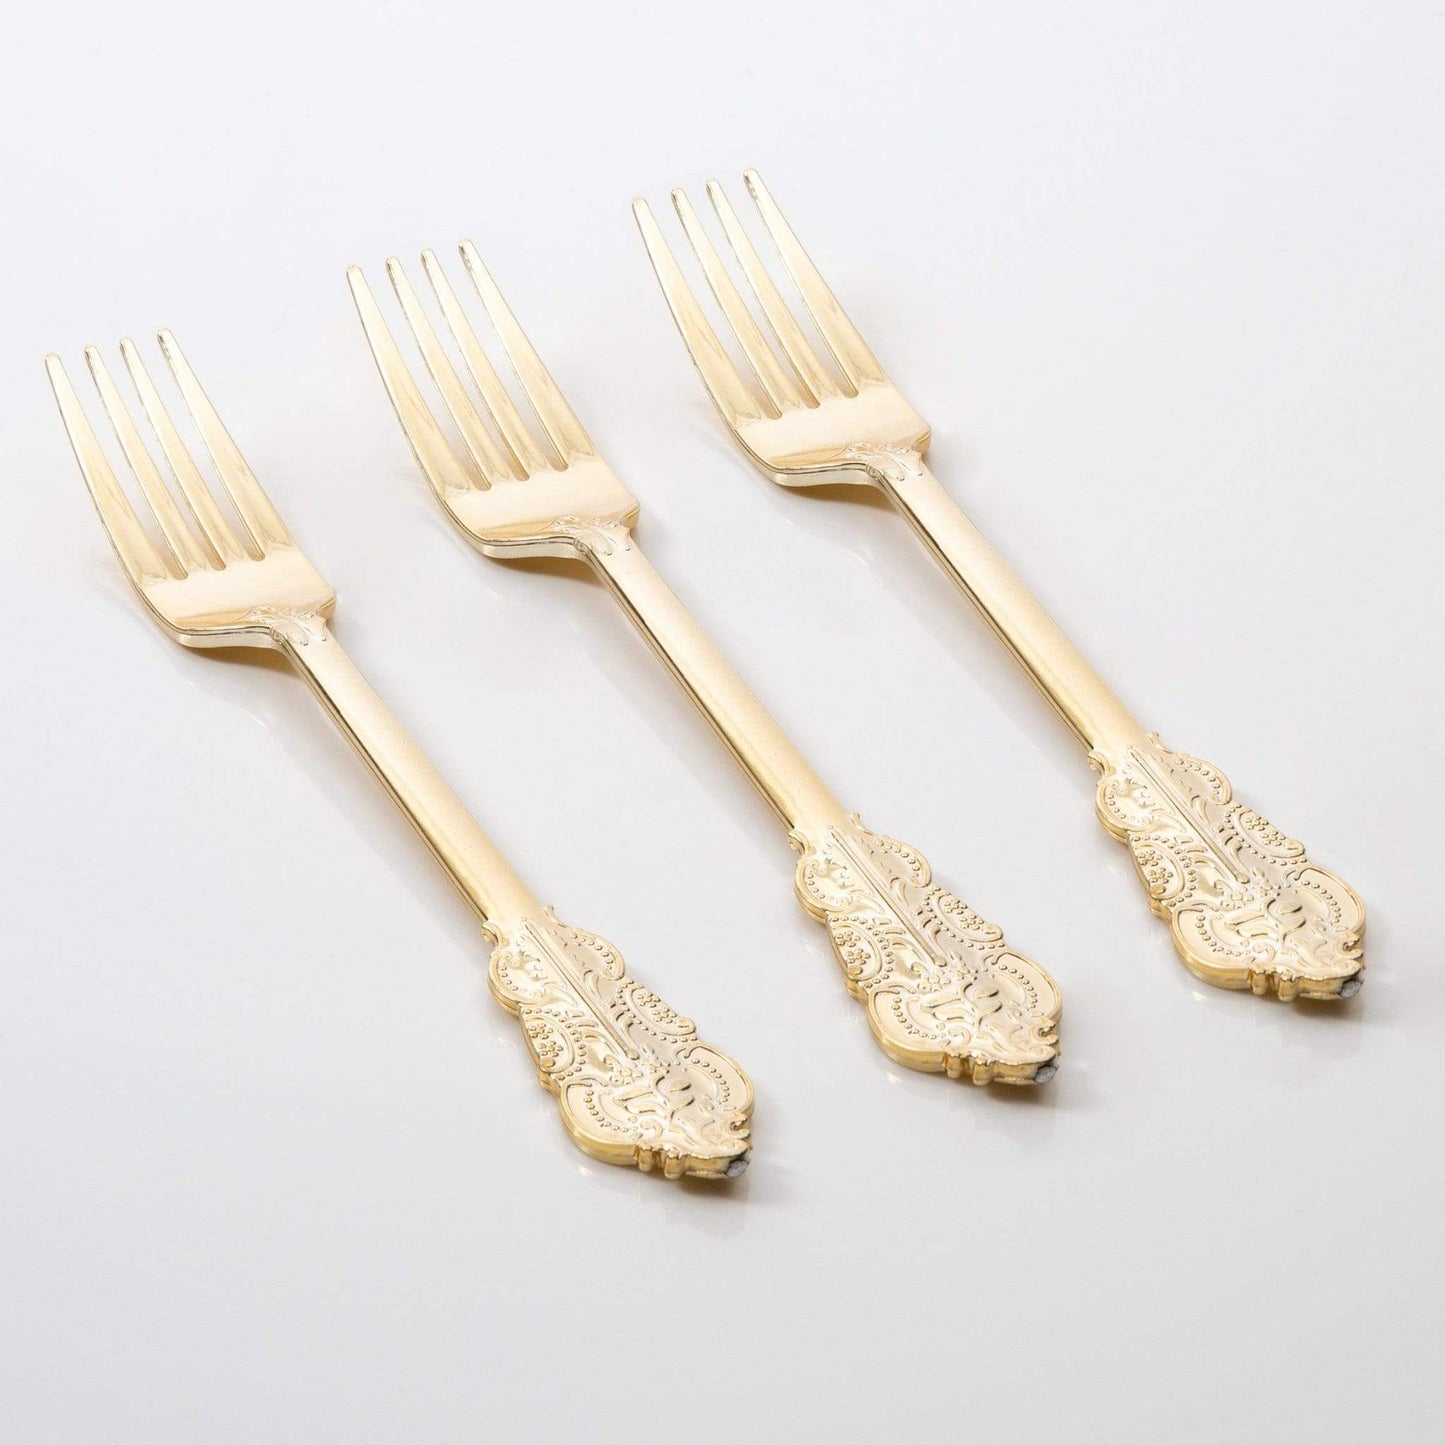 VENETIAN GOLD FORKS | 20 PIECES